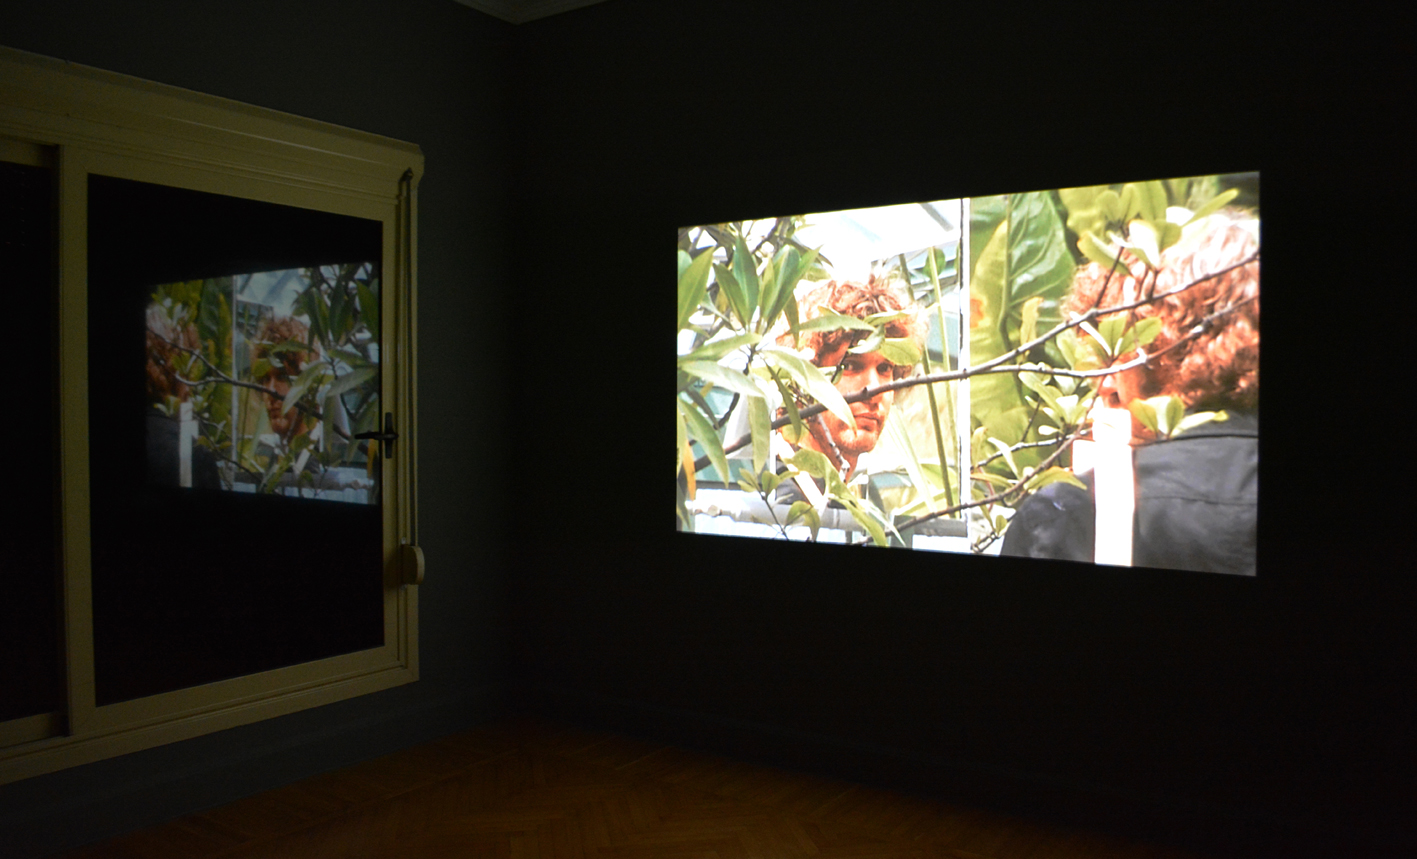  Installation shot, Basim Magdy, Time Laughs Back at You Like a Sunken Ship, 2012, Super 8 film transferred to HD video. 9 min. 31 sec. 